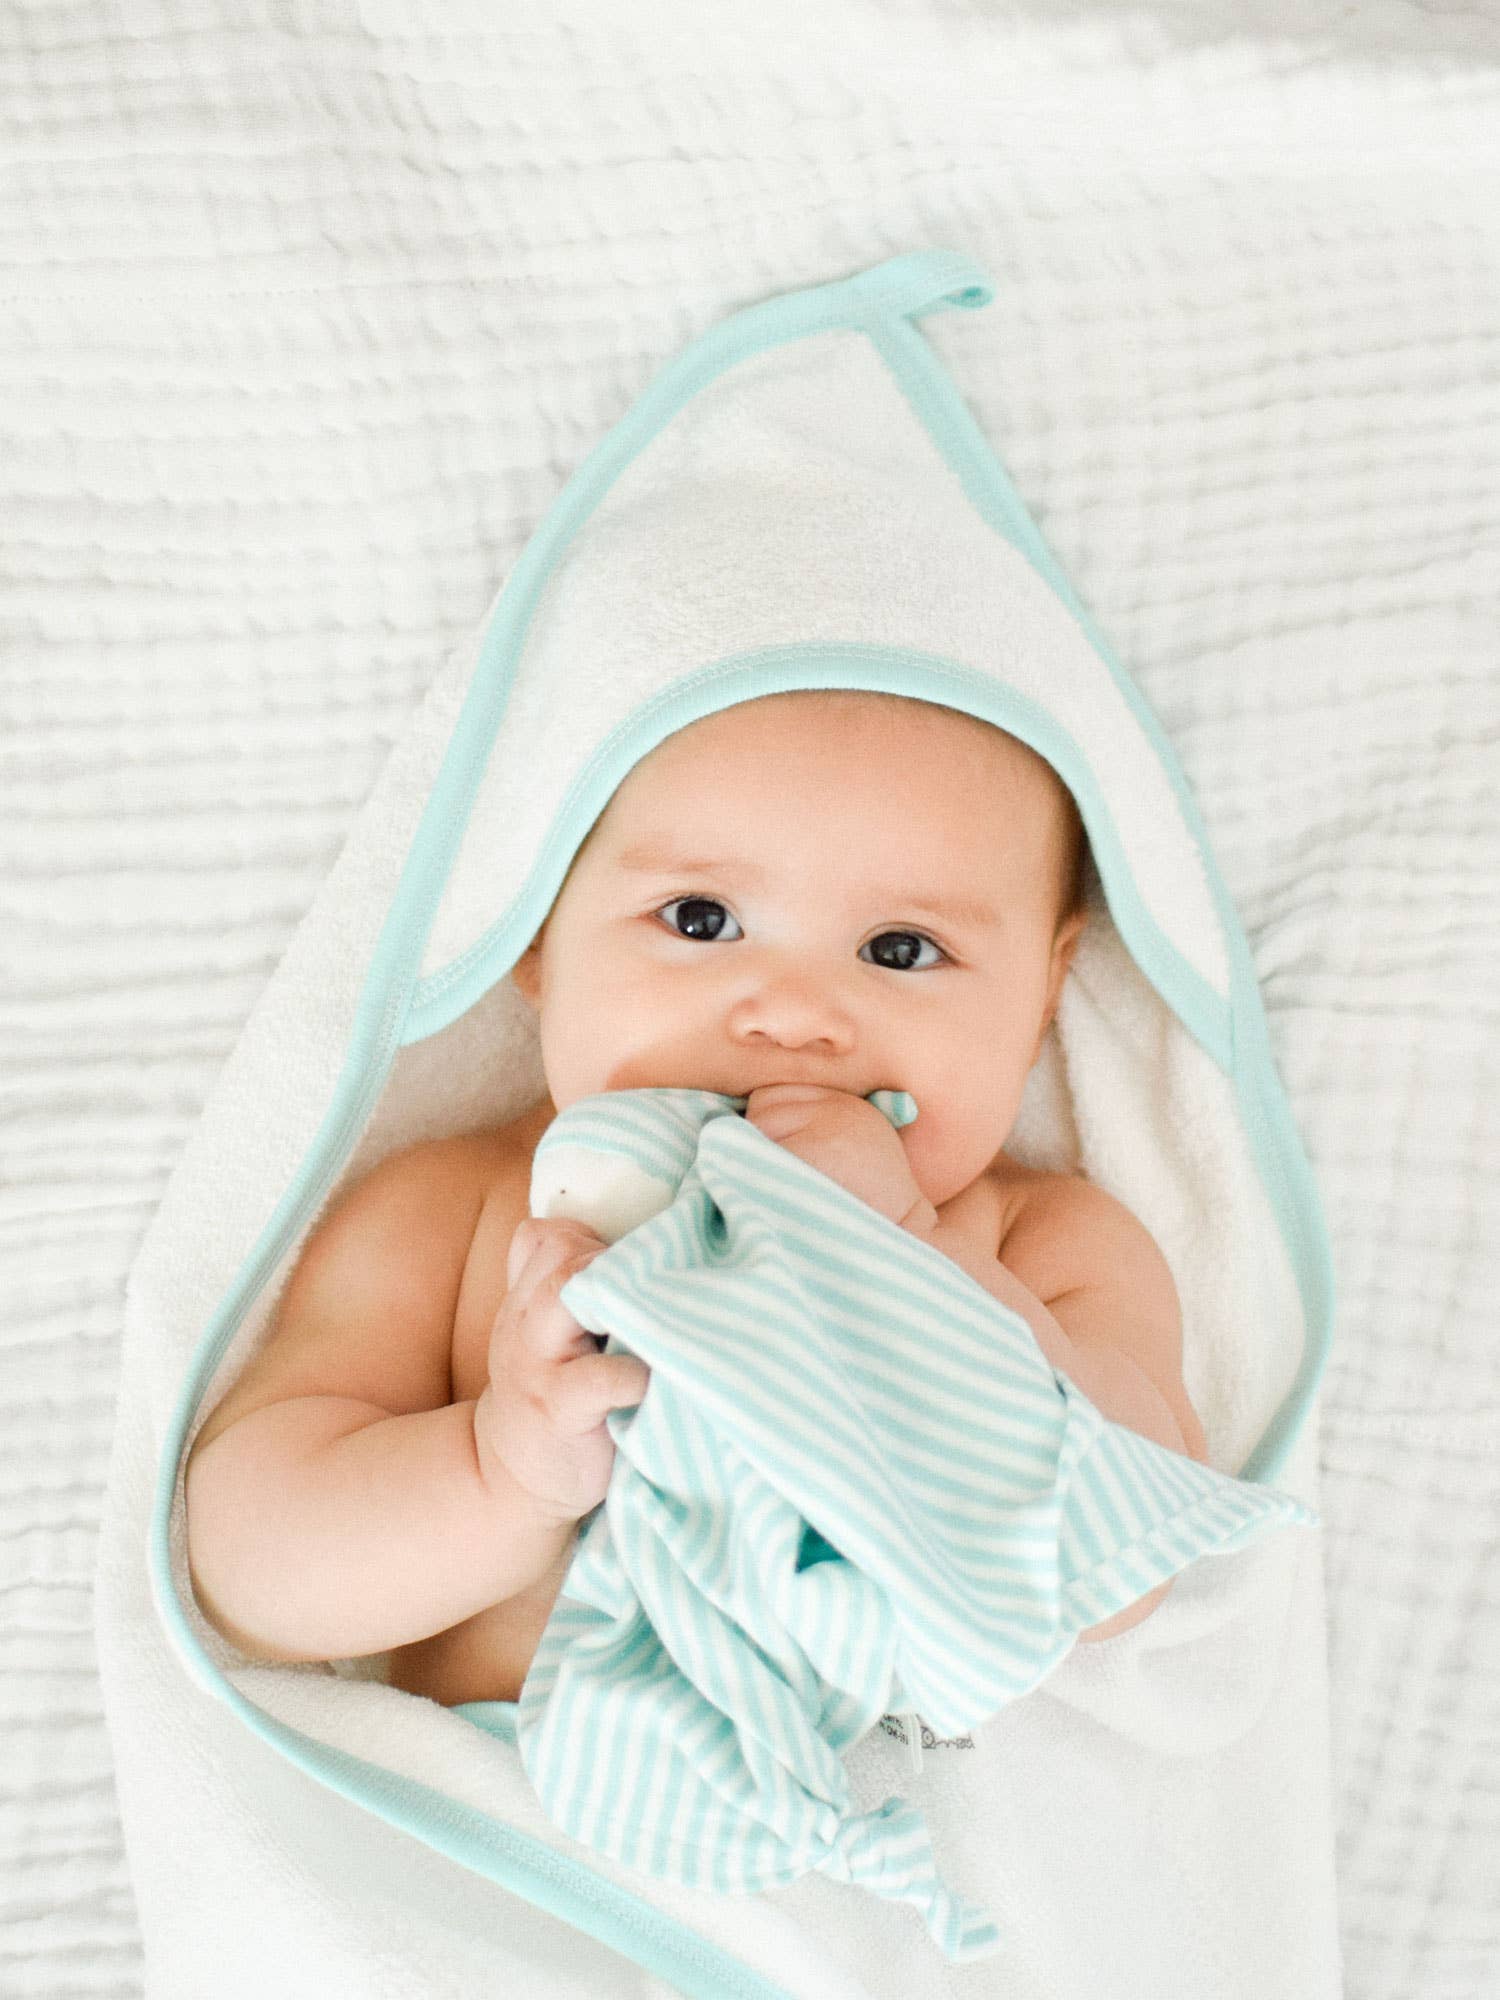 Baby laying on a white blanket wrapped in aOrganic Aqua Deluxe Hooded Towel